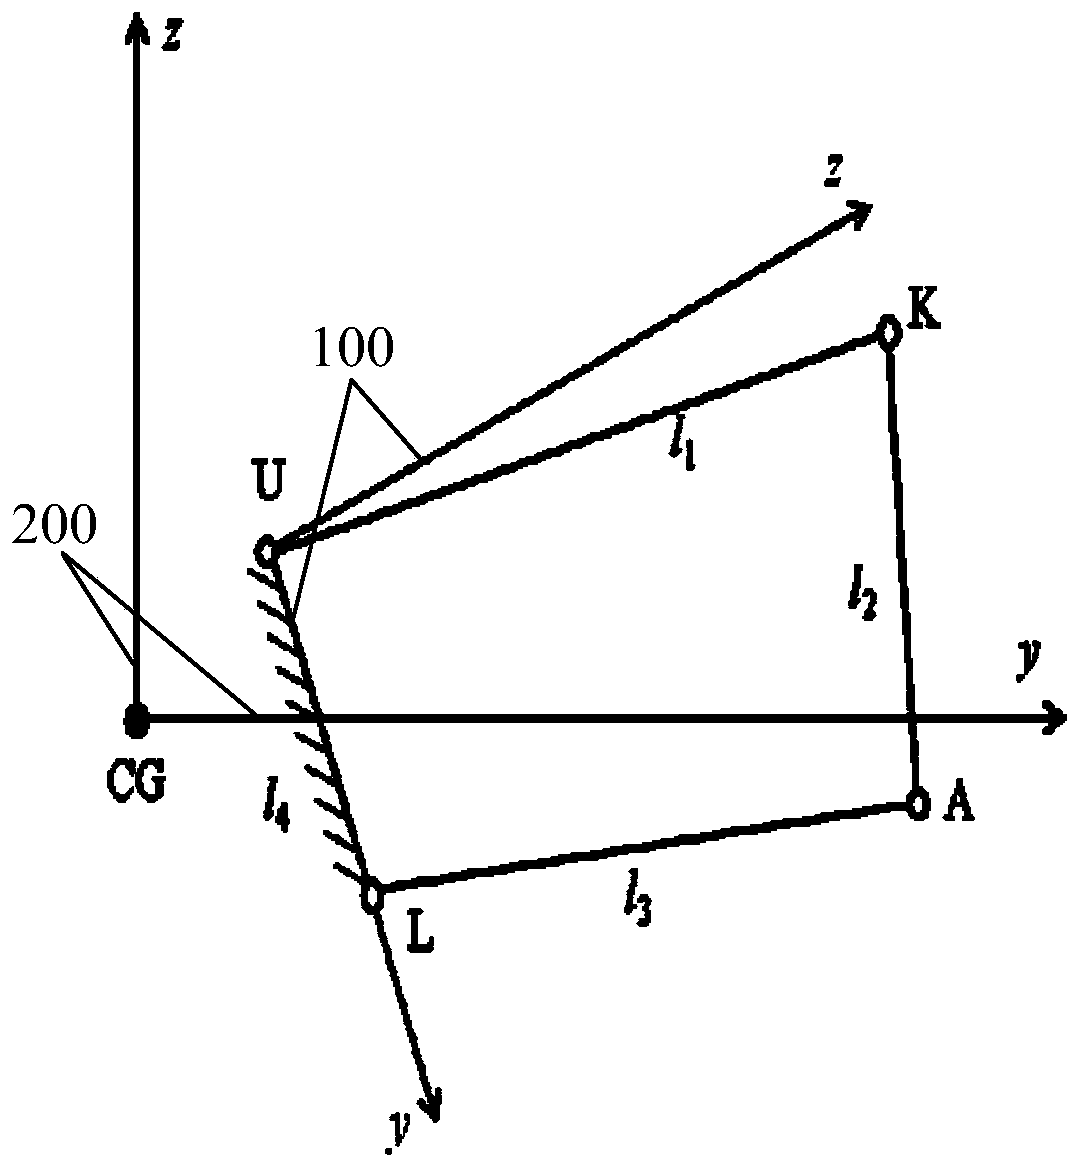 A method and device for analyzing the forward-looking geometric motion of a suspension